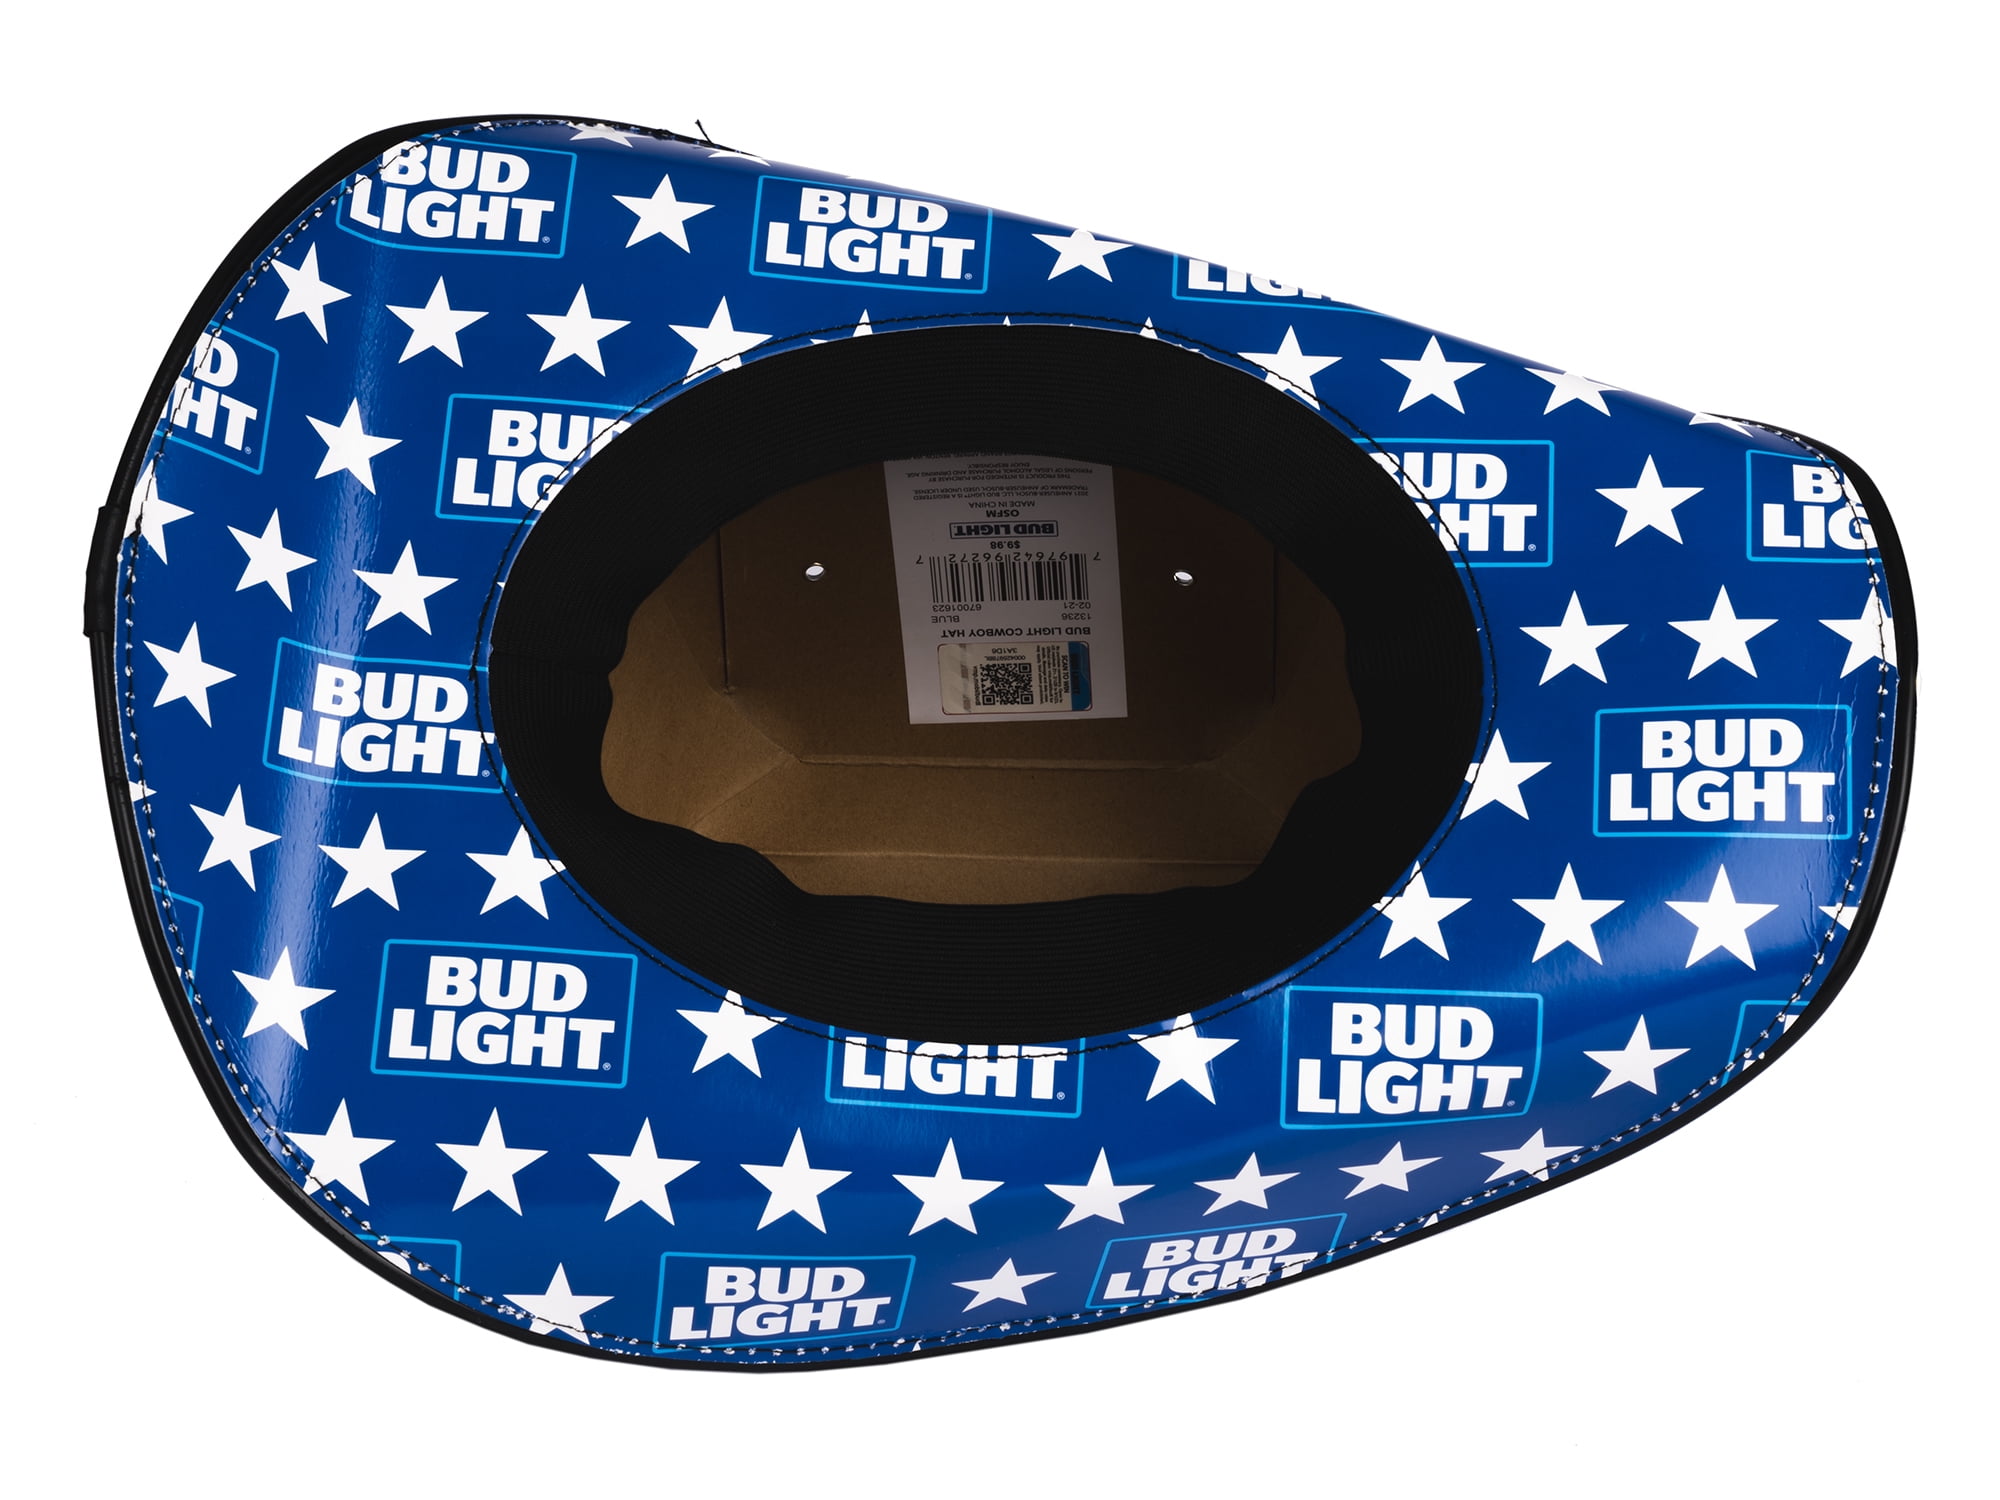 Fahey's Fun Finds 🛒 🛍 on Instagram: “Anyone need a beer cowboy hat?!  Found these at Walmart! 🍺🤠 The inside is patriotic! …